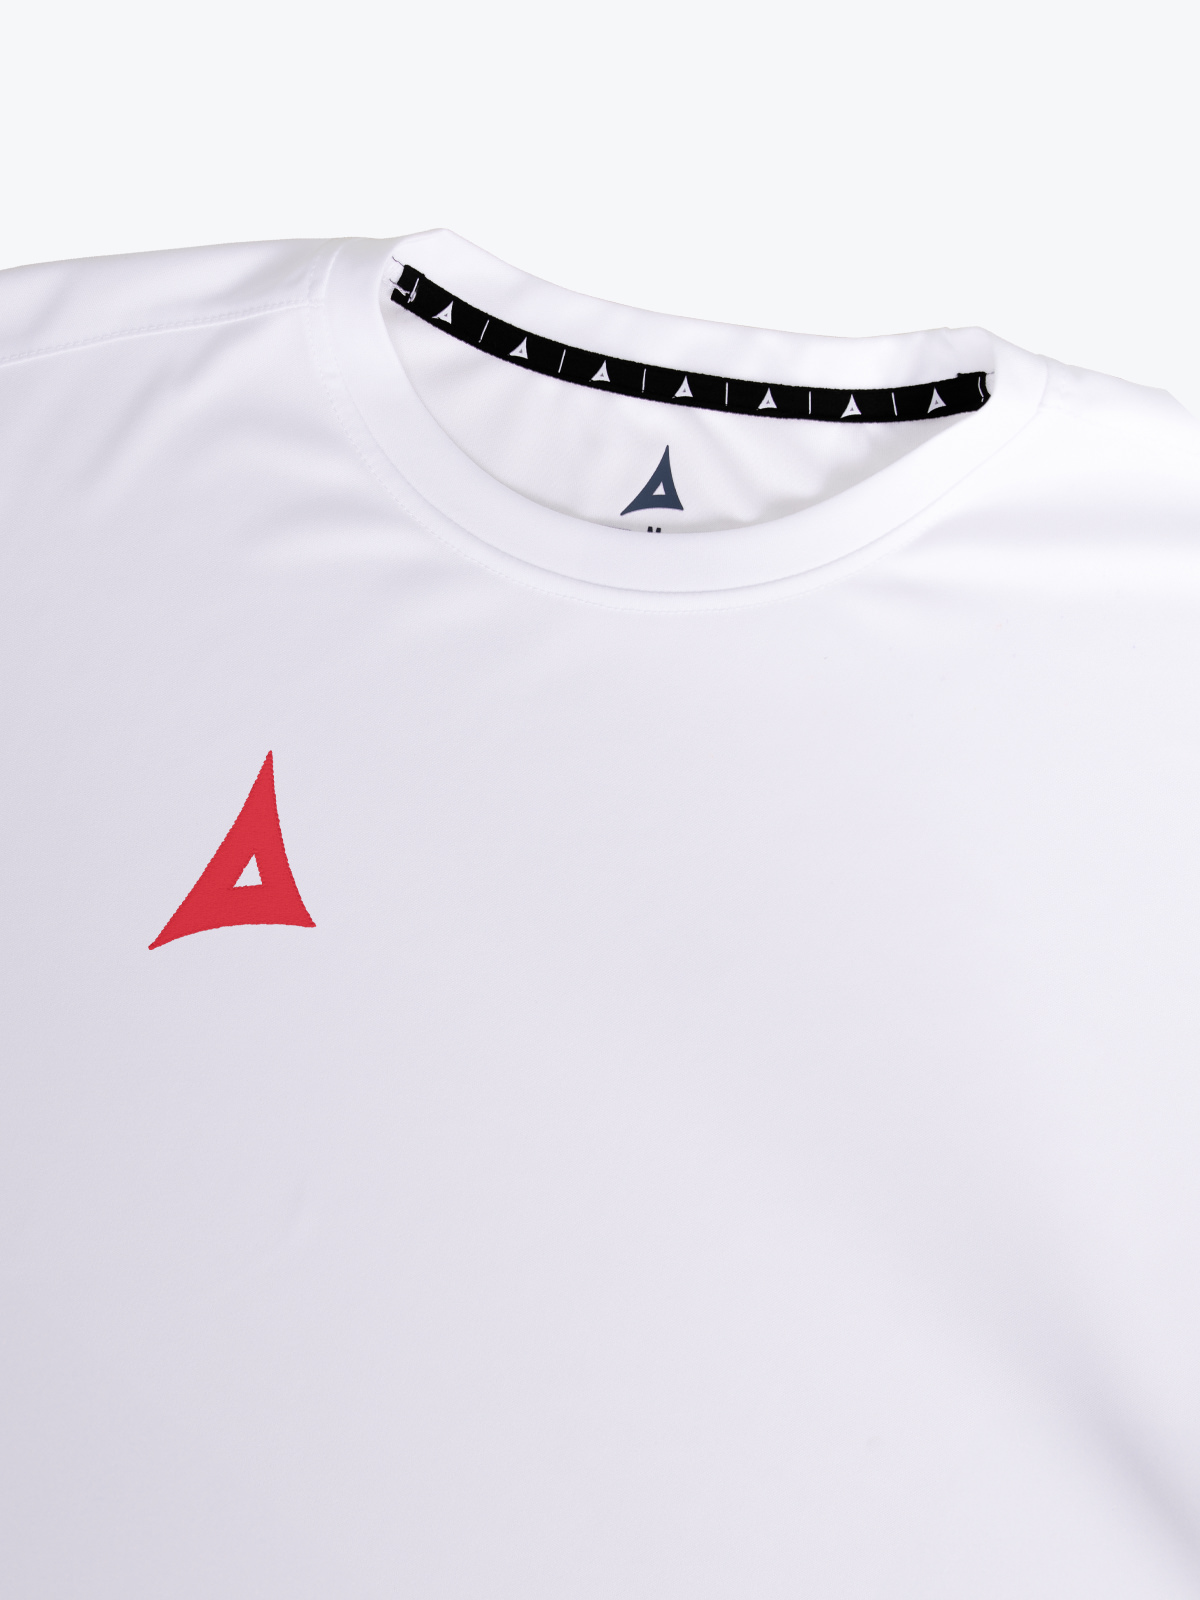 picture of focus 2 classic jersey - white/red